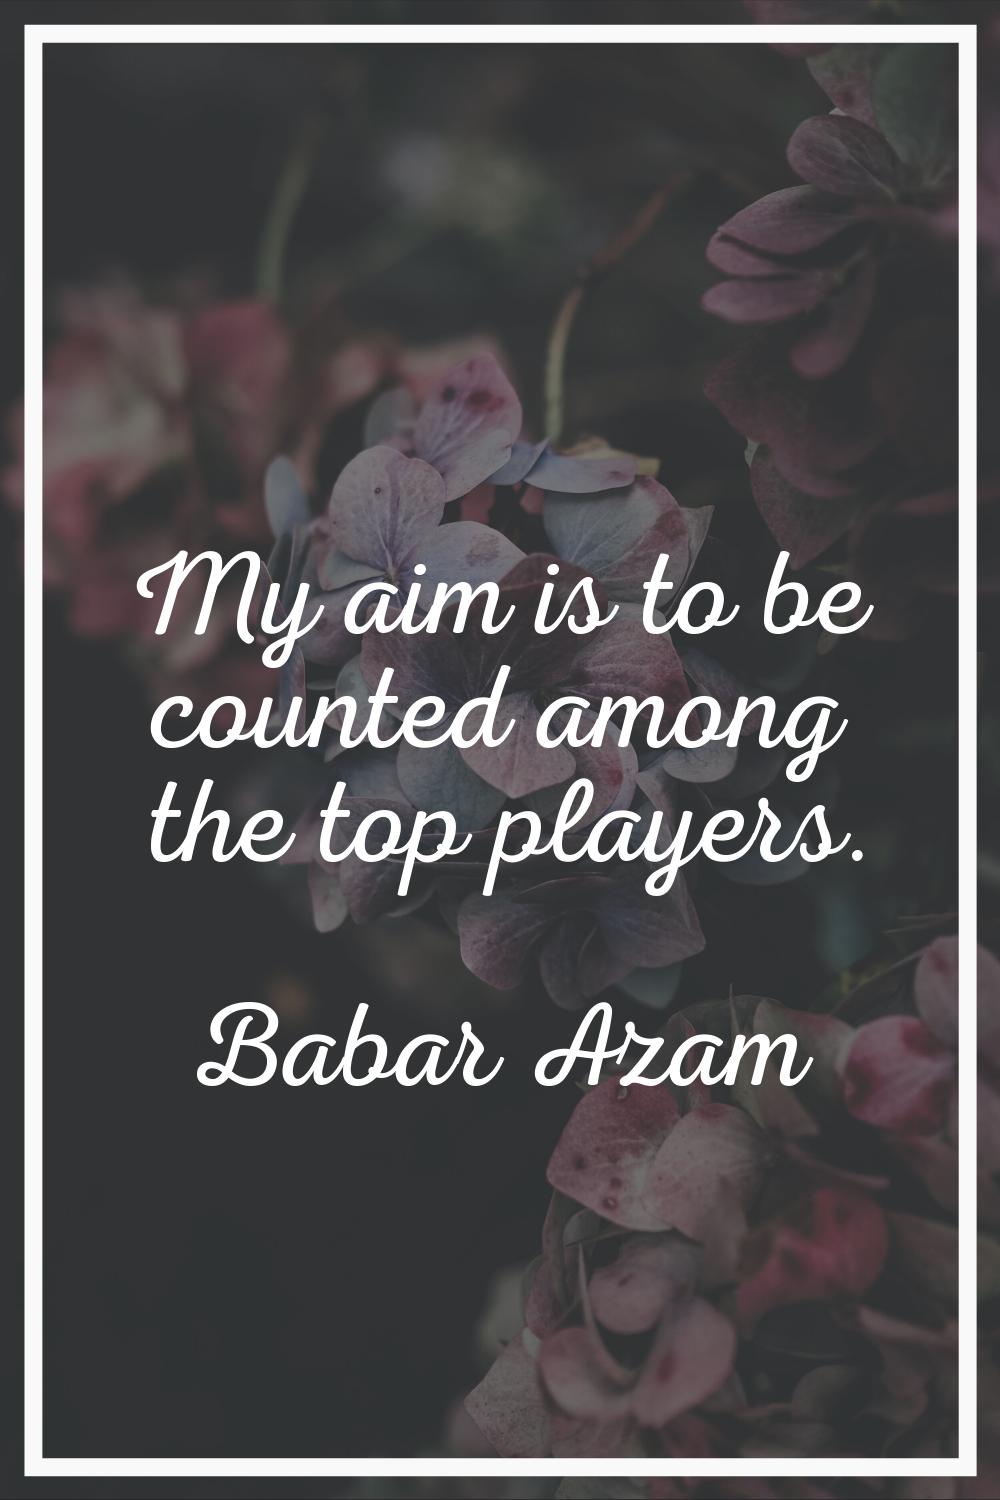 My aim is to be counted among the top players.